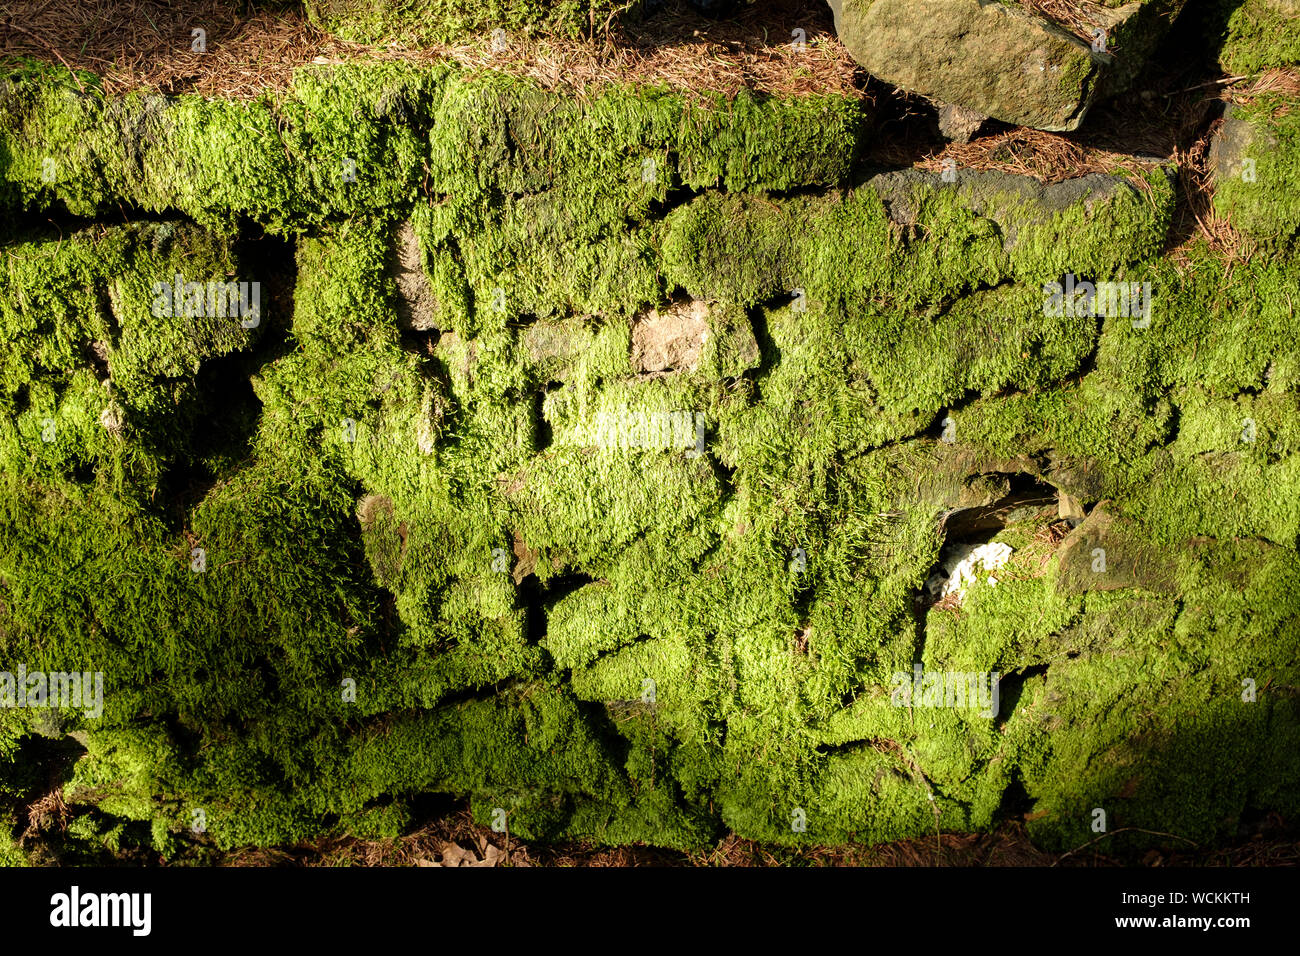 Dried moss stock image. Image of wall, green, moss, stone - 127137549